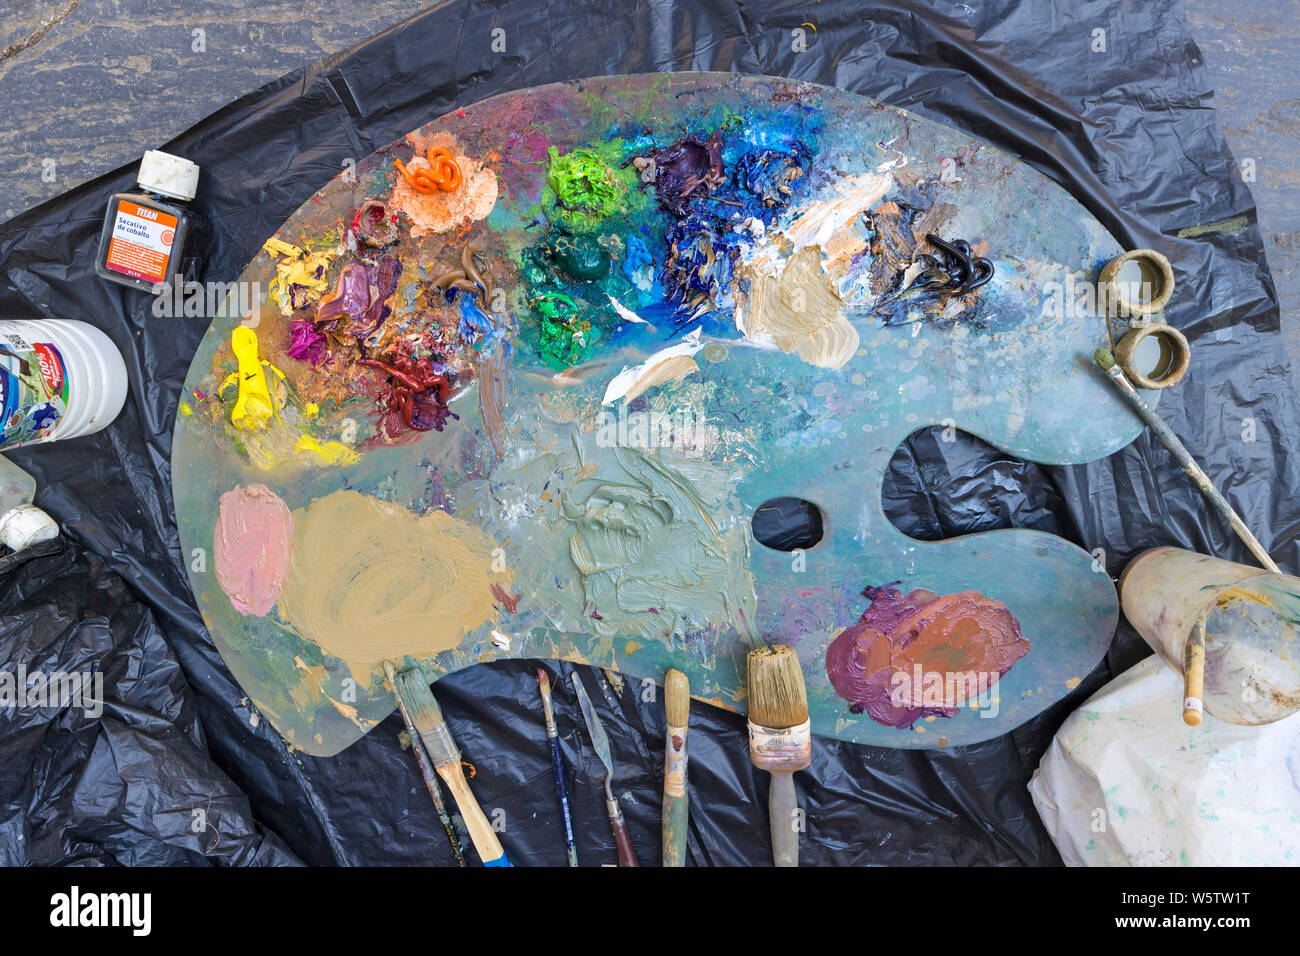 A Painter’s Palette with Paints and Brushes. Stock Photo